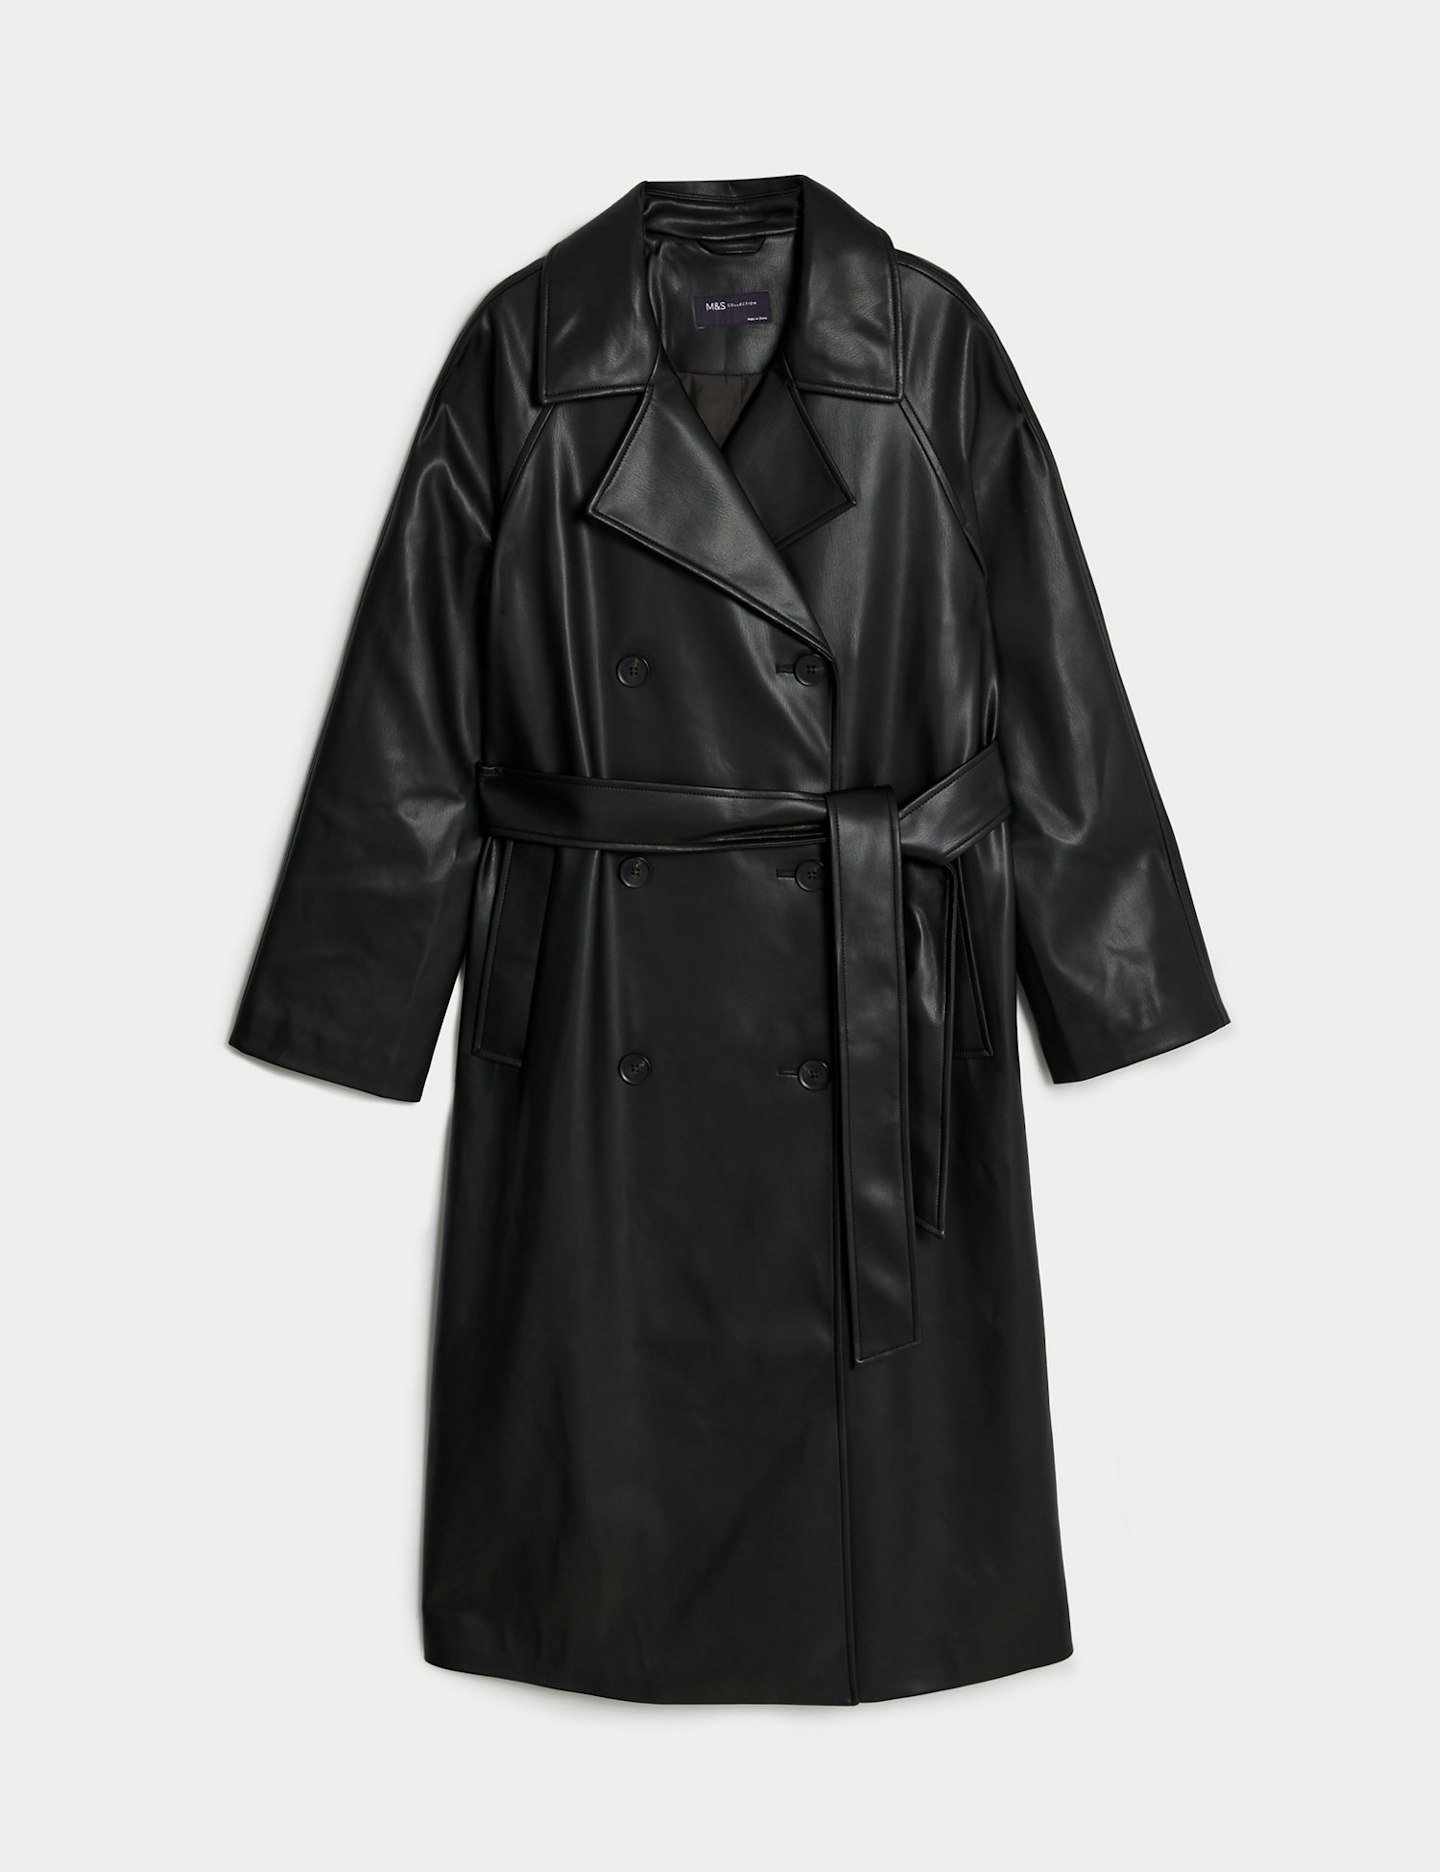 Marks & Spencer, Faux Leather Belted Trench Coat